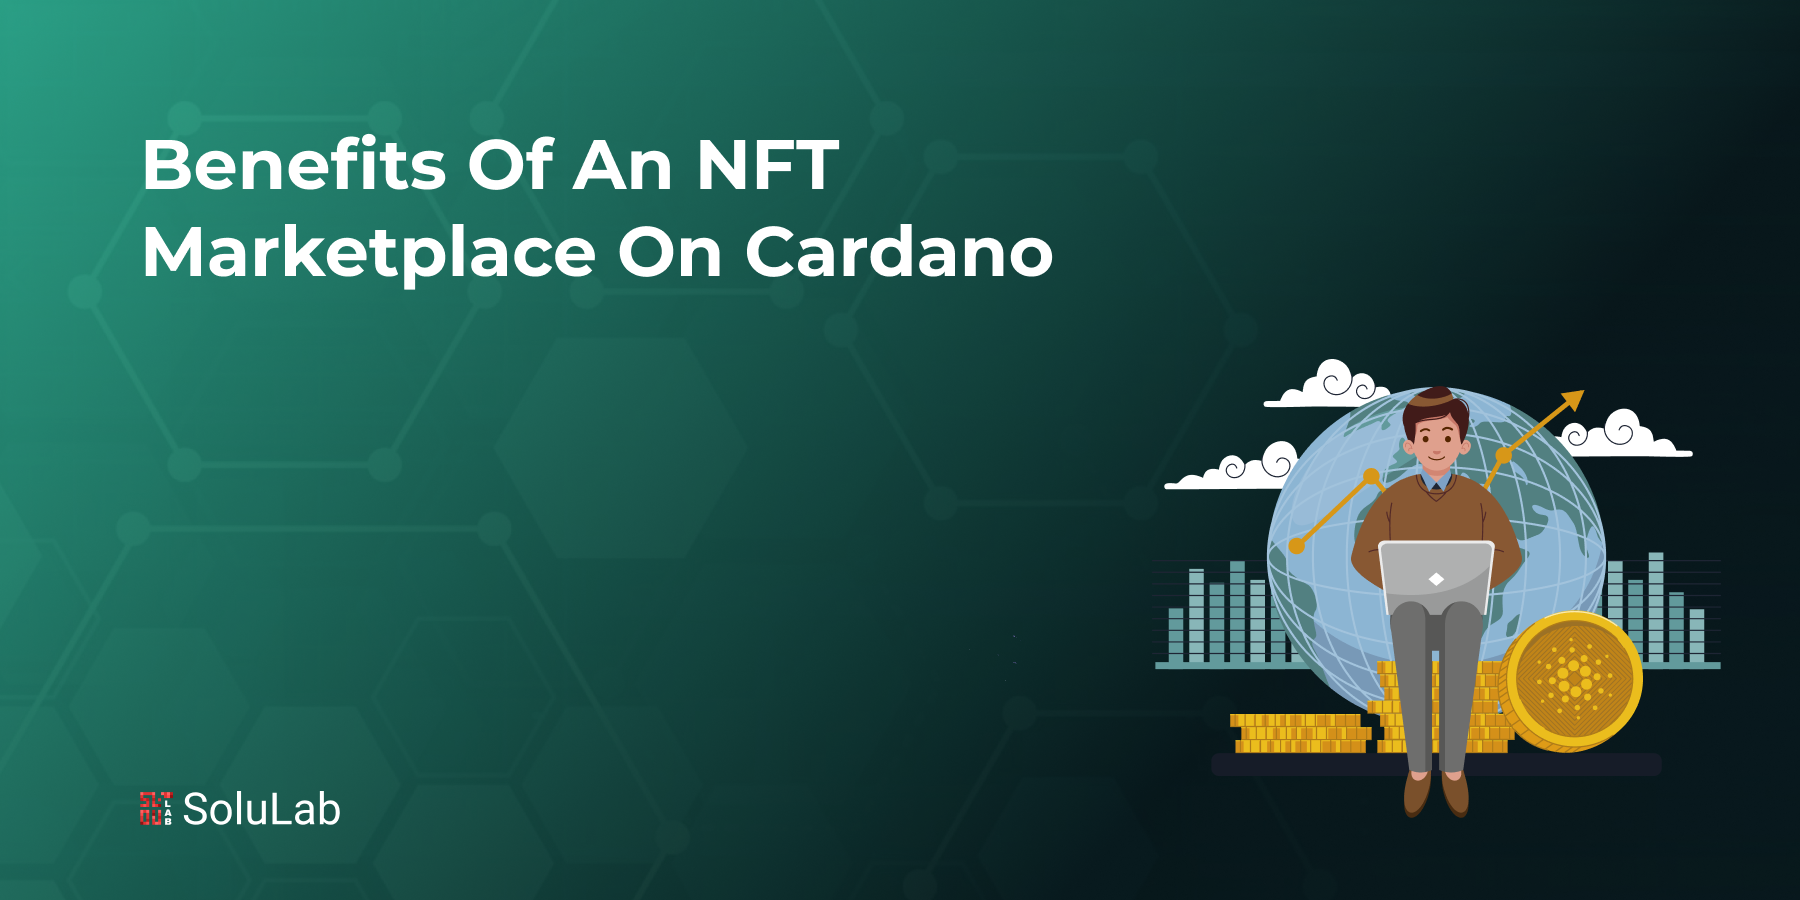 Benefits Of An NFT Marketplace On Cardano